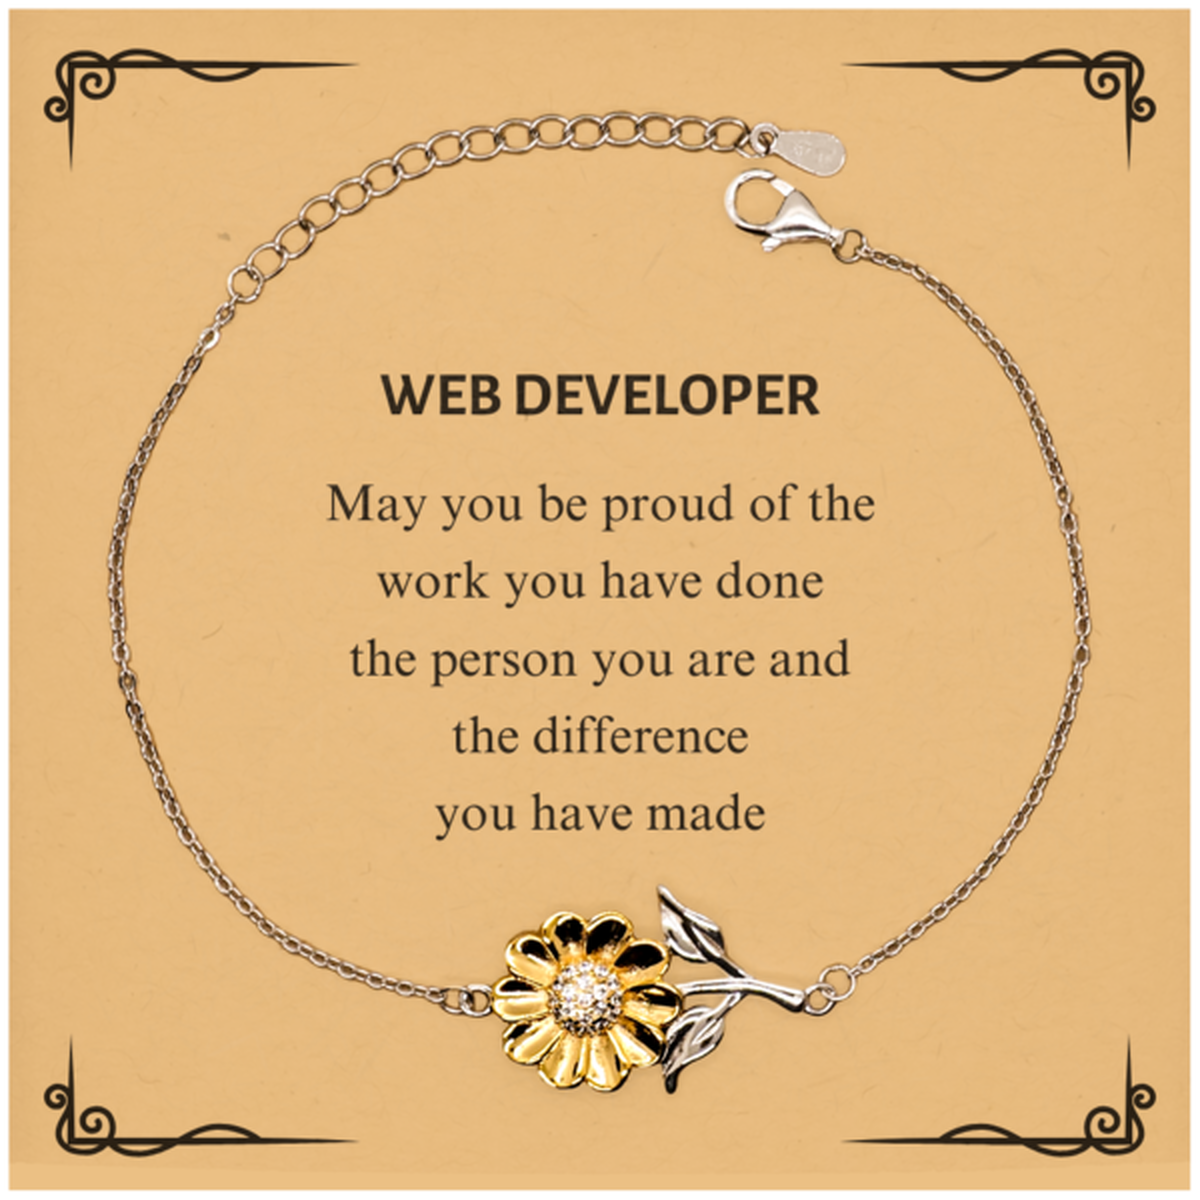 Web Developer May you be proud of the work you have done, Retirement Web Developer Sunflower Bracelet for Colleague Appreciation Gifts Amazing for Web Developer